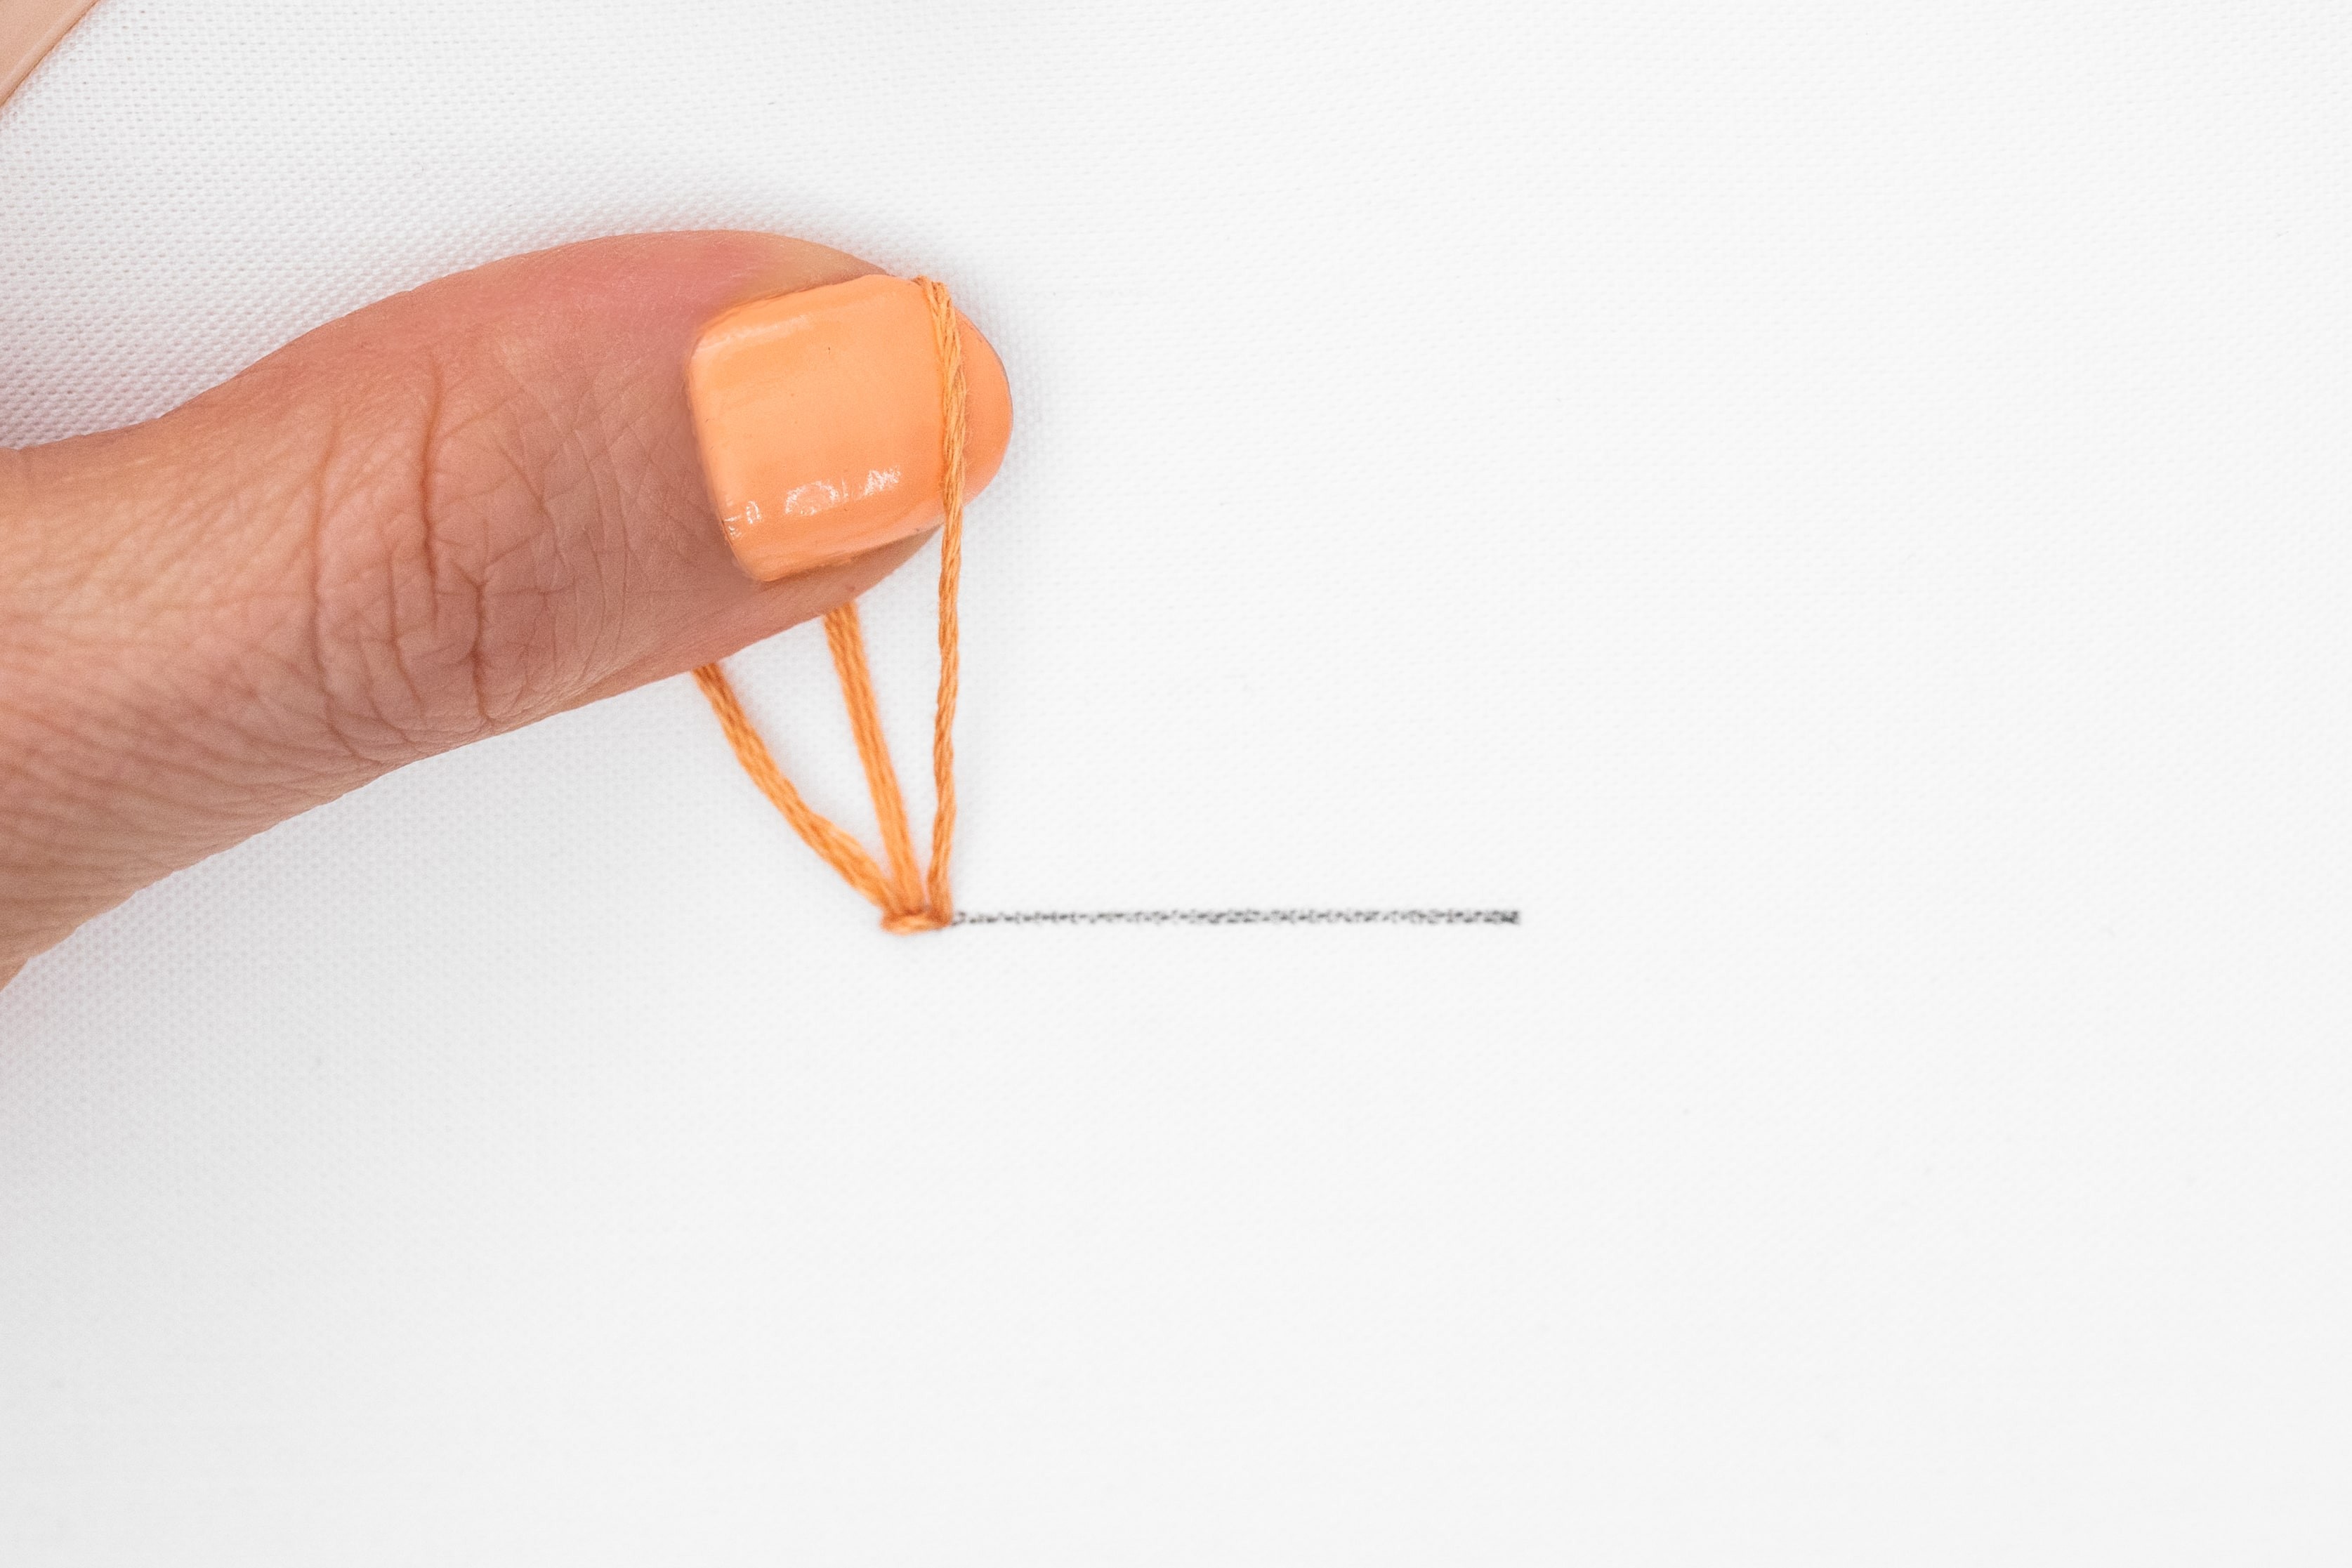 A thumb holds up a loop that has been created from stitching.